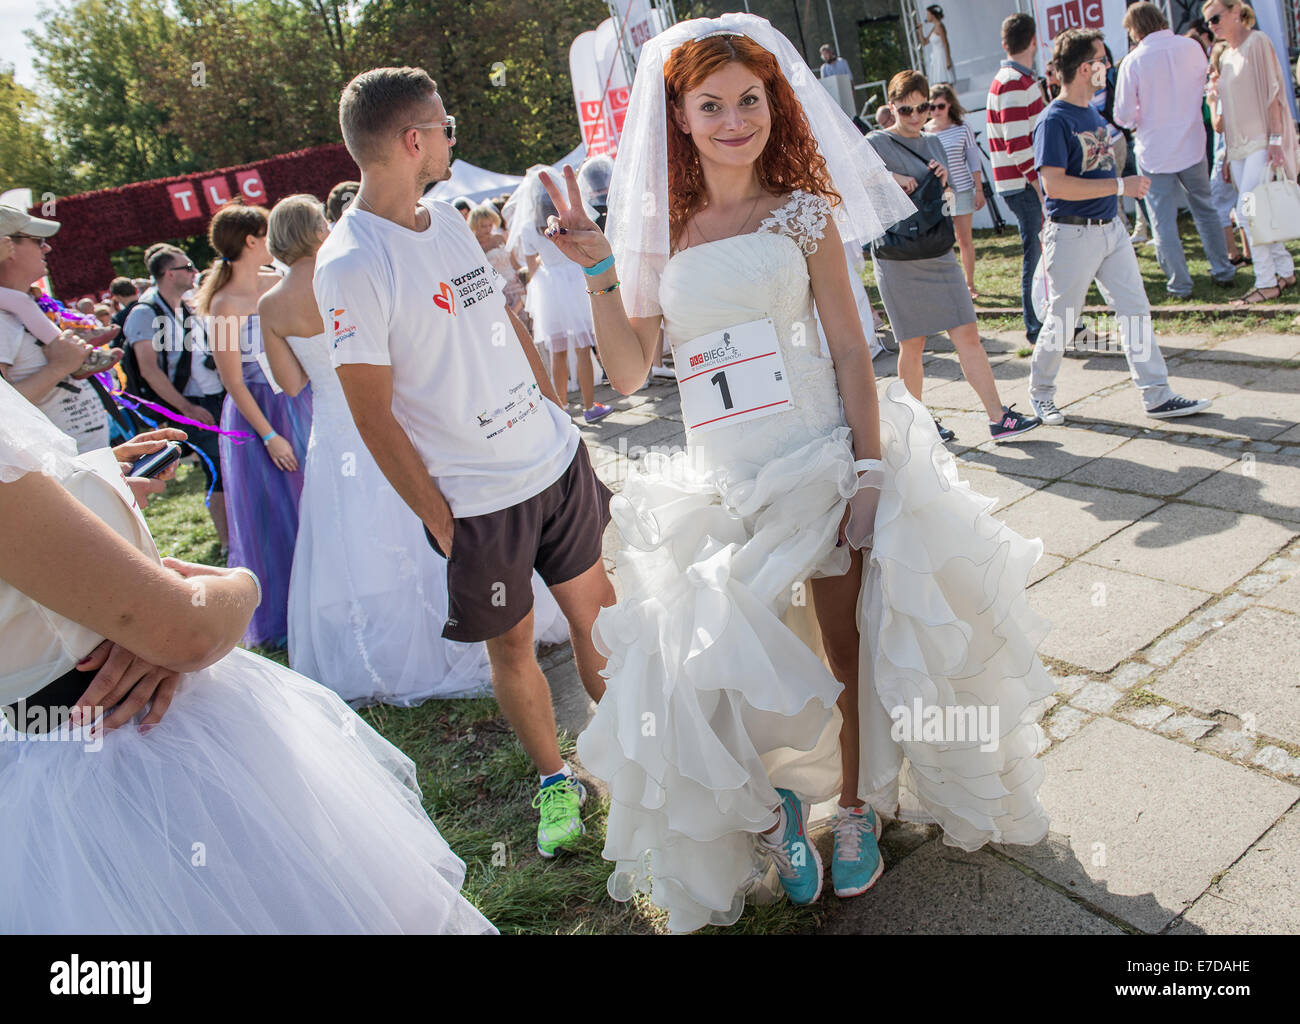 Warsaw, Poland. 15th September, 2014. Participant of the first Polish Wedding Dress Run in Agrykola Park in Warsaw. The collected money from charity run will cover cost of rehabilitation of Julia Torla (Miss Wheelchair 2014 in Poland) who is disabled due to serious back injury after car accident. Credit:  kpzfoto/Alamy Live News Stock Photo